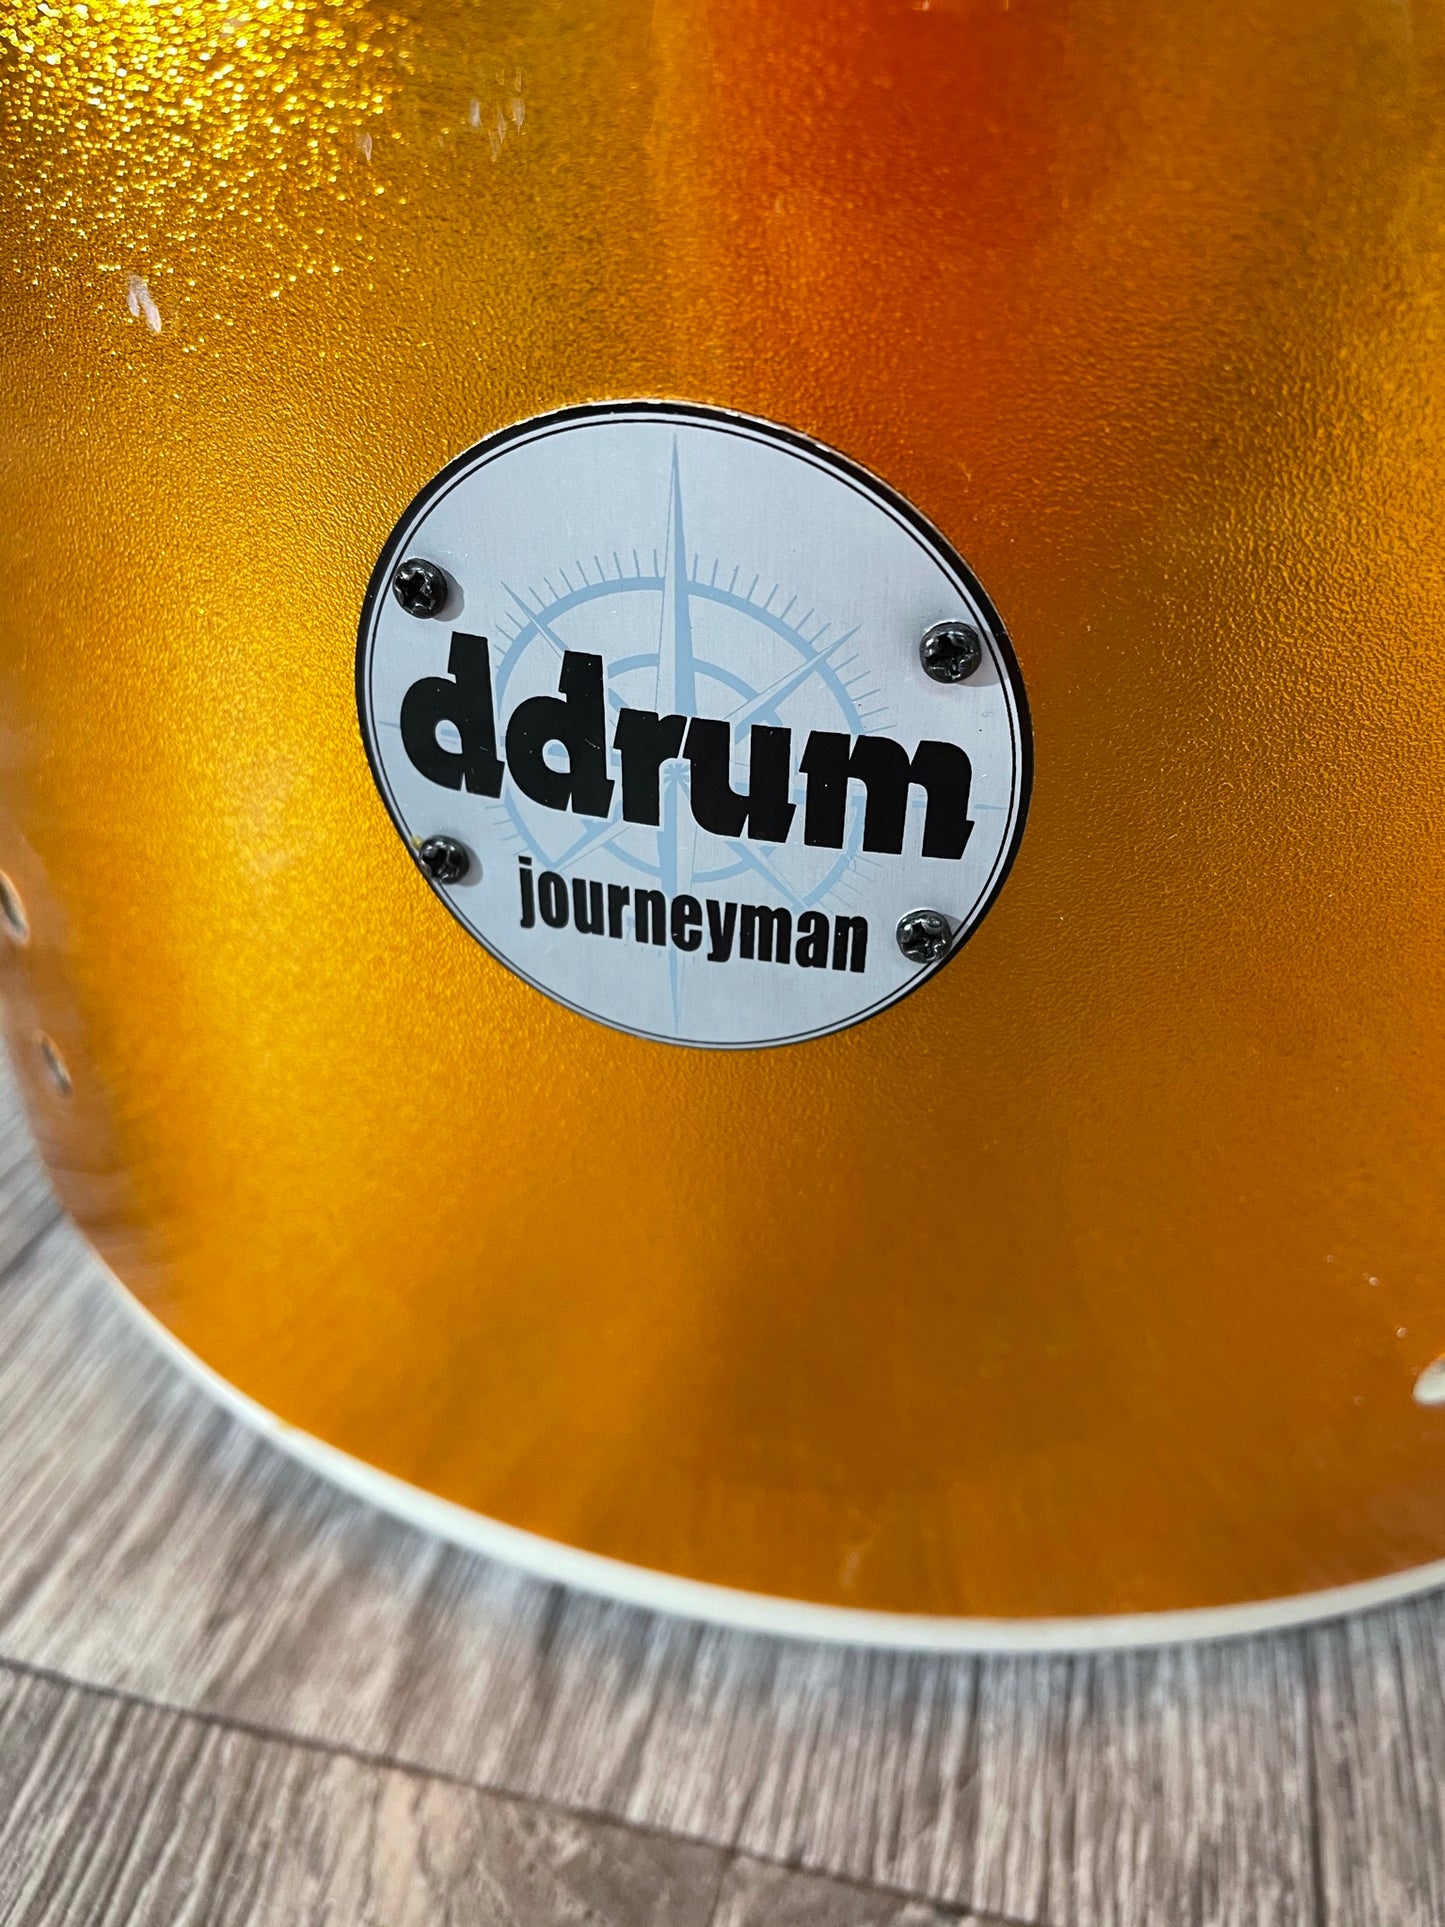 Ddrum Journeyman Rack Tom Drum Shell 12”x8” Bare Wood Project / Upcycle